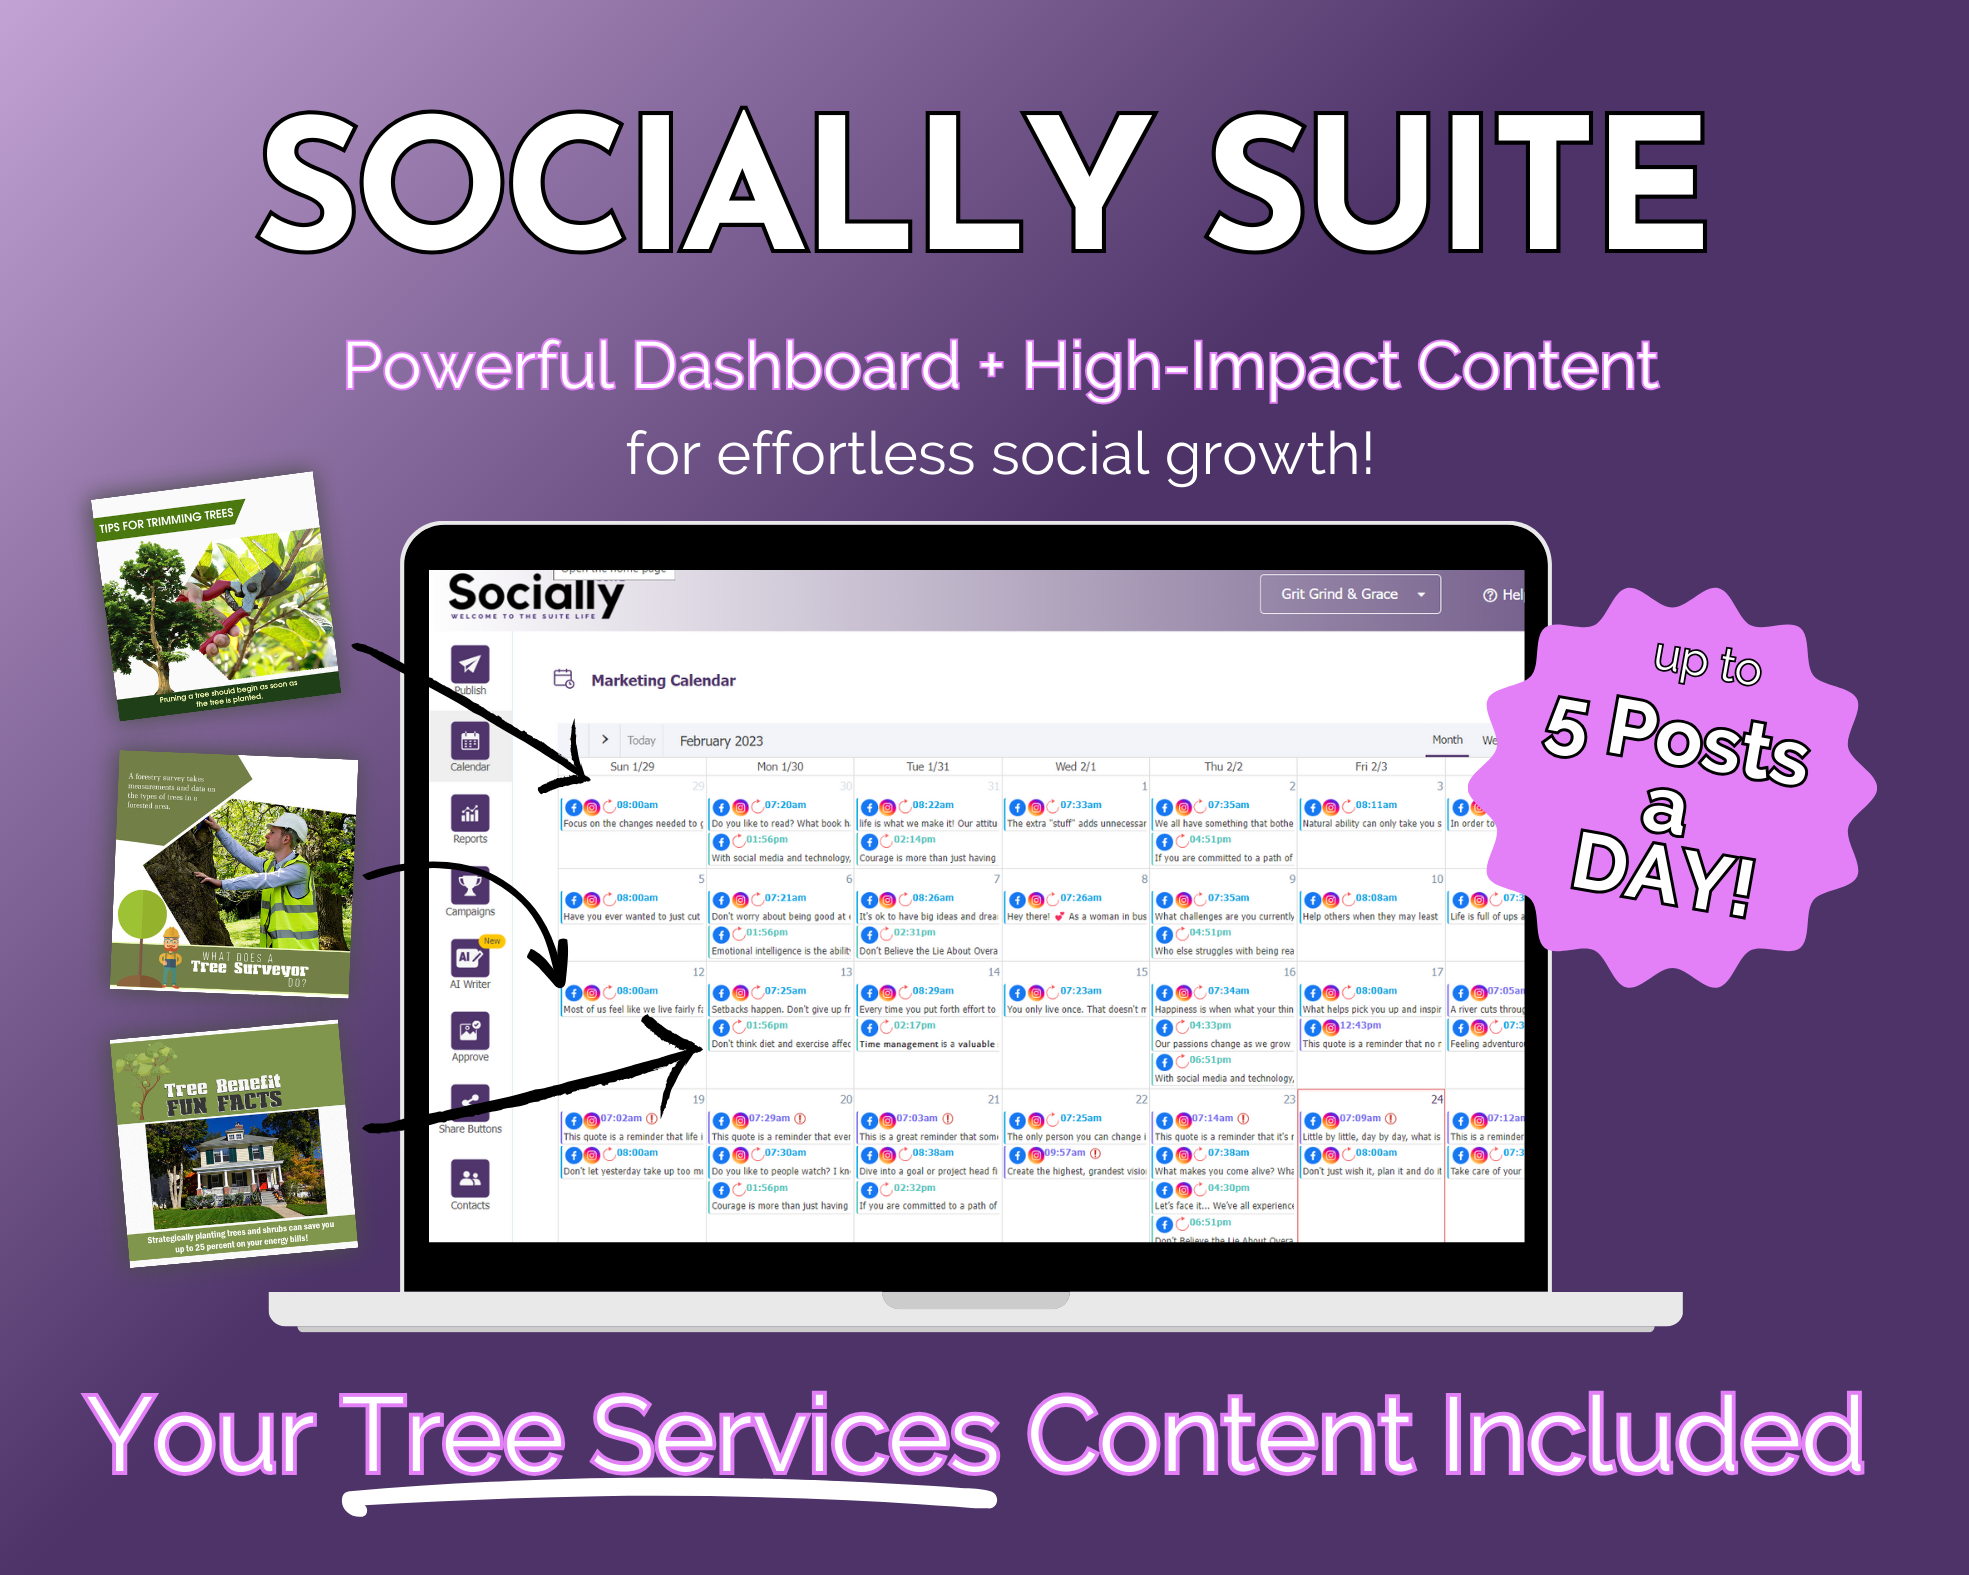 Promotional graphic for the "Socially Suite Membership" by Get Socially Inclined, a social media marketing tool highlighting a powerful content dashboard with pre-included tree service content, capable of managing up to 5 posts a day.